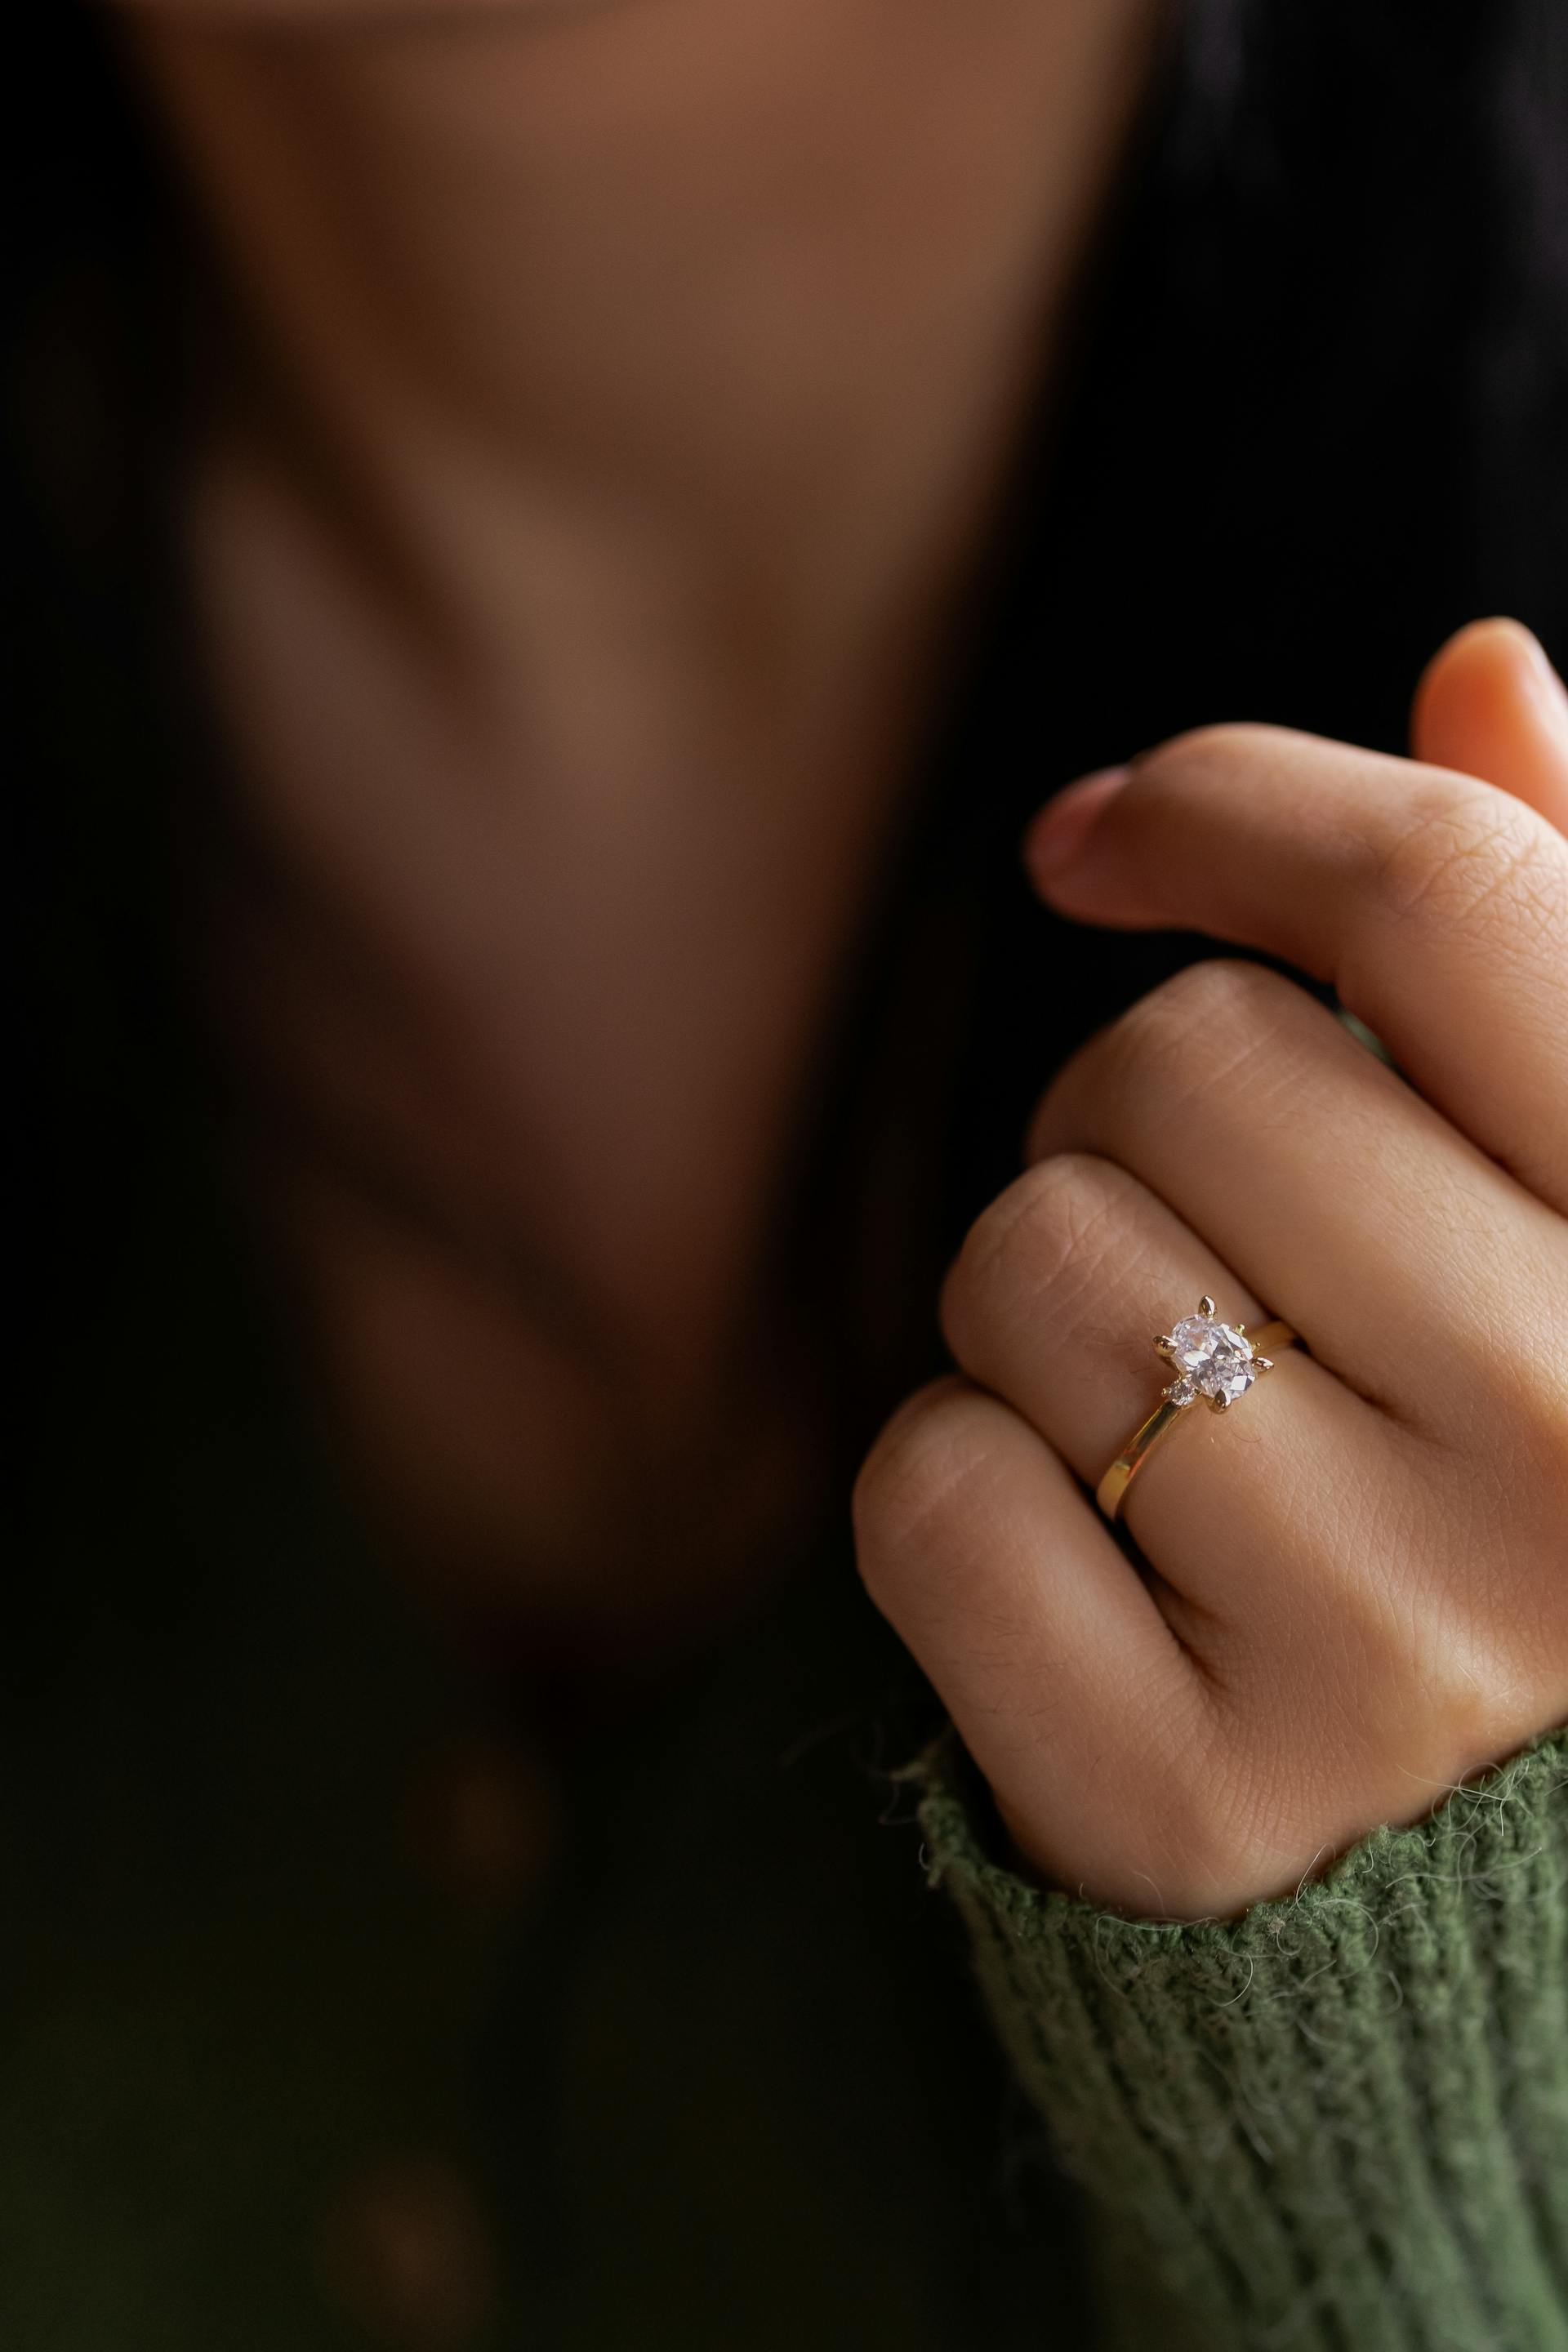 Engagement ring on woman's hand | Source: Pexels